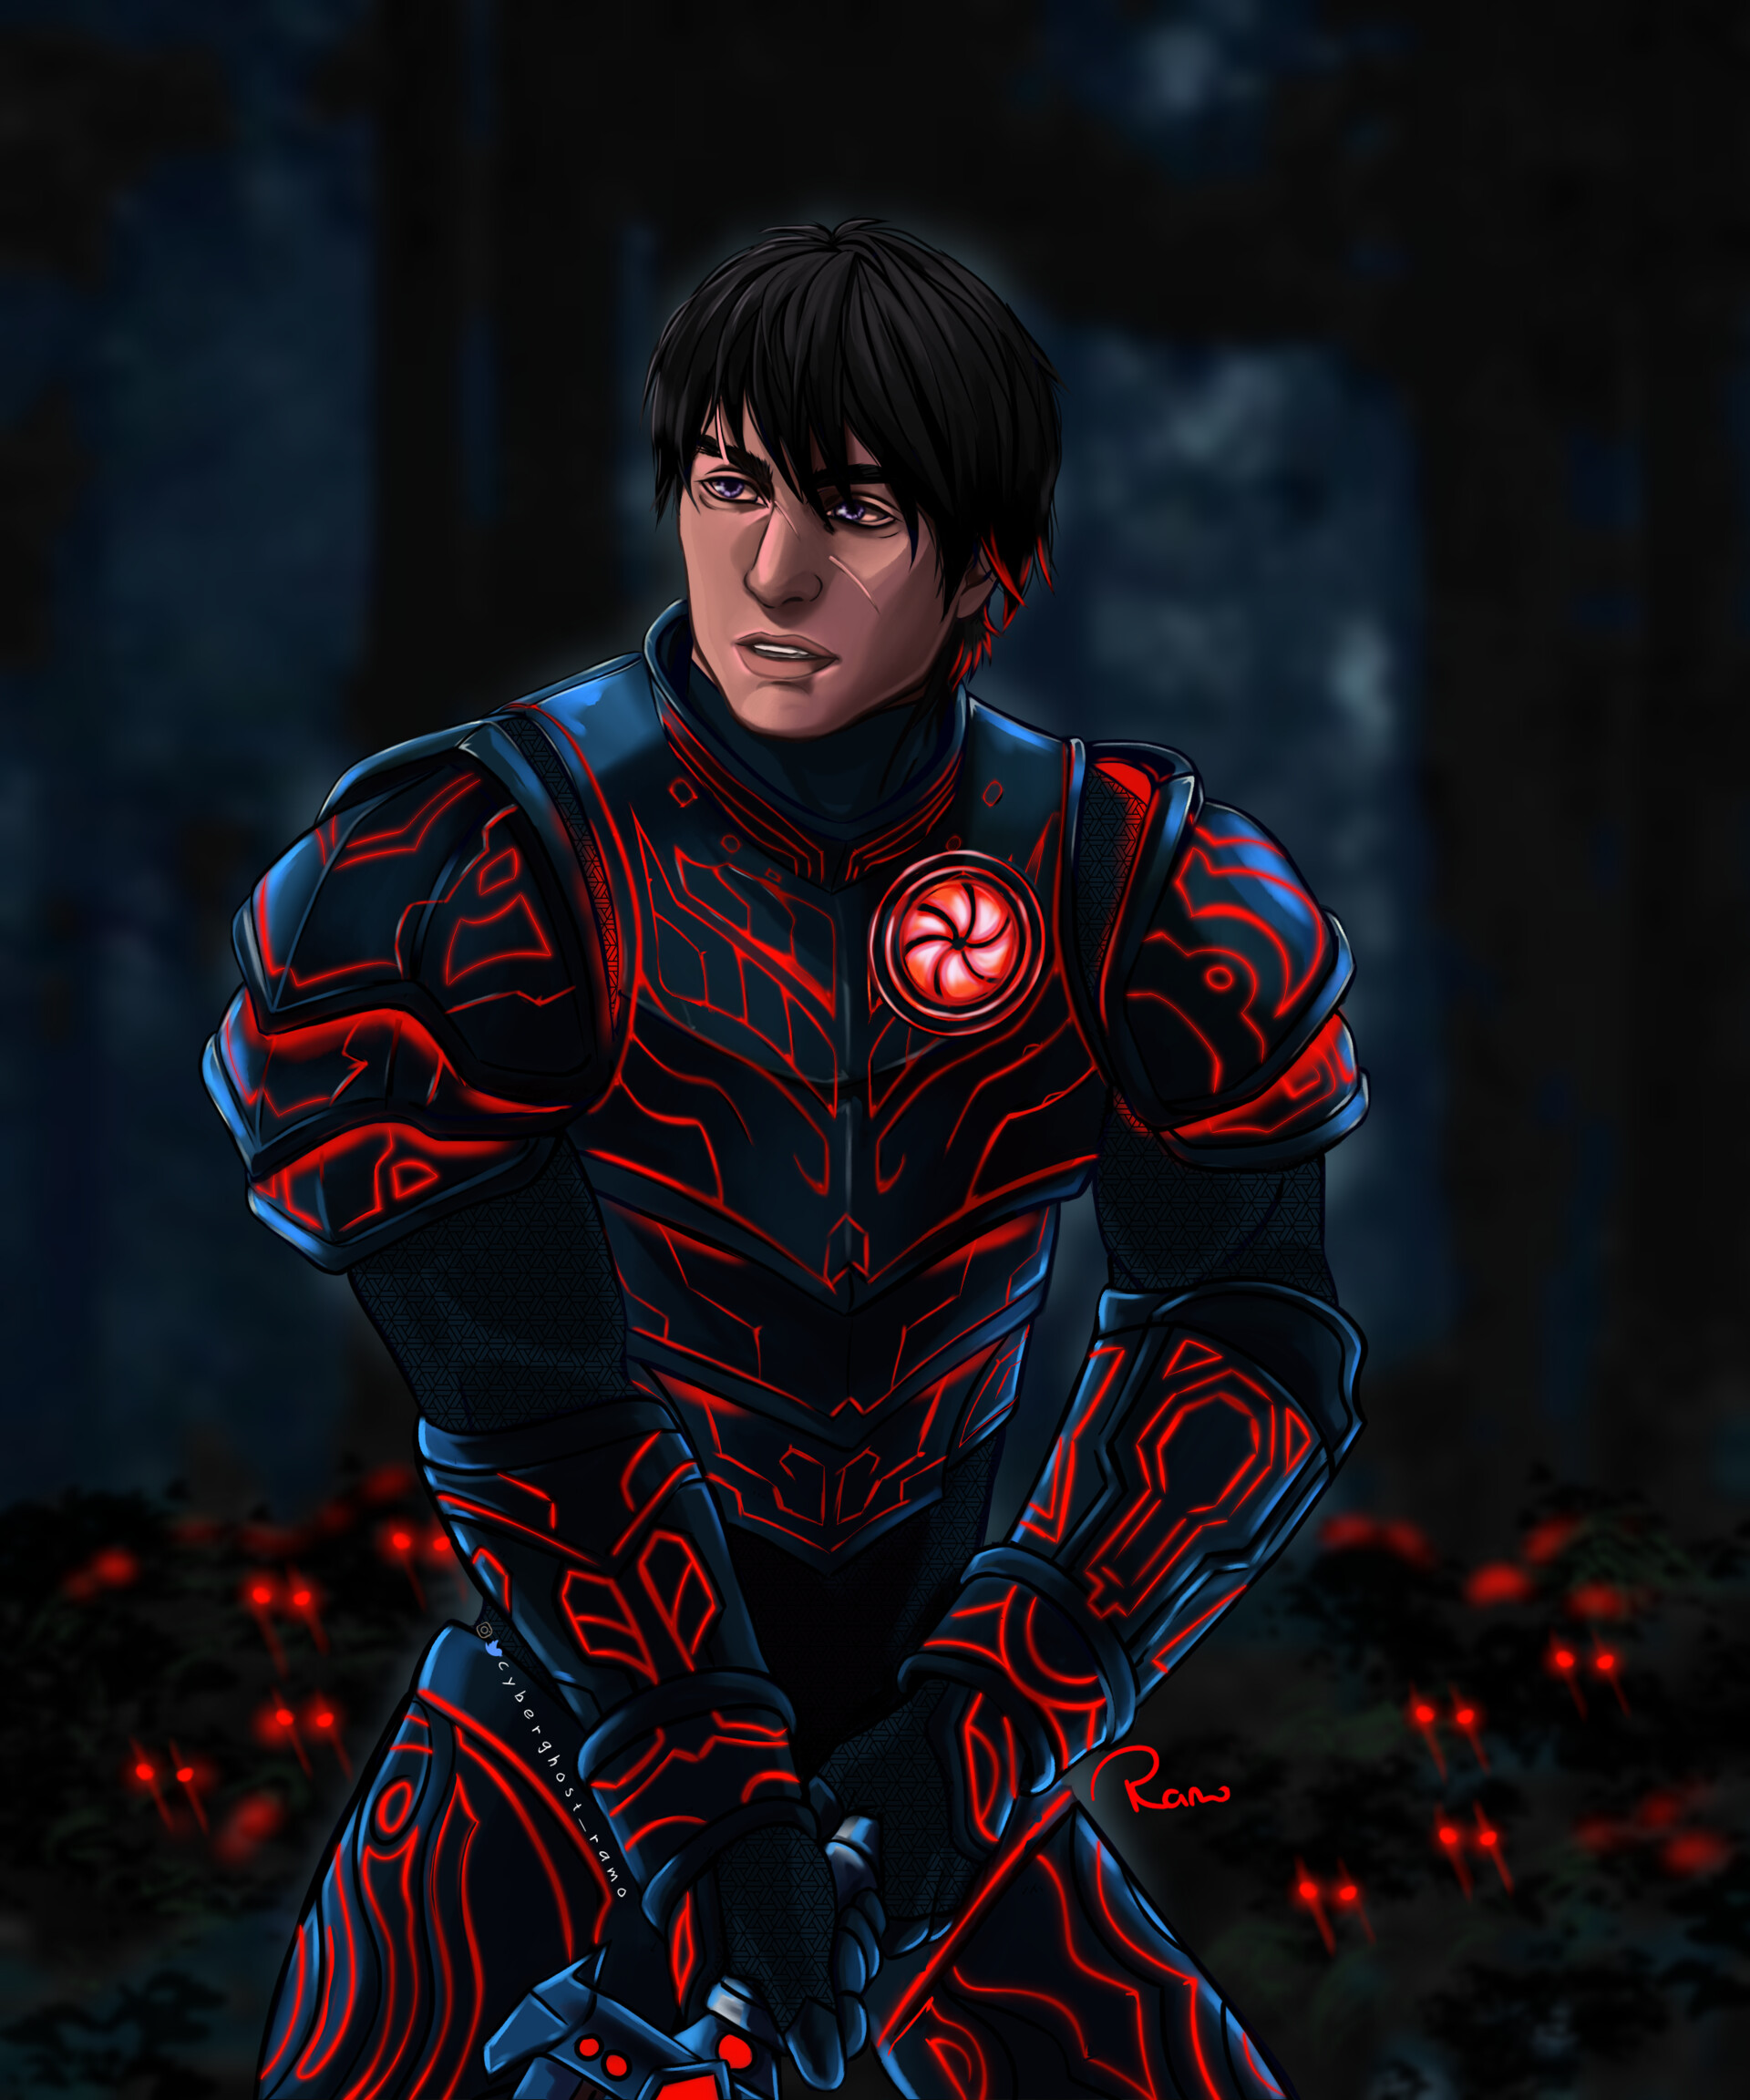 Jim Eclipse Armor by nathan23q on DeviantArt